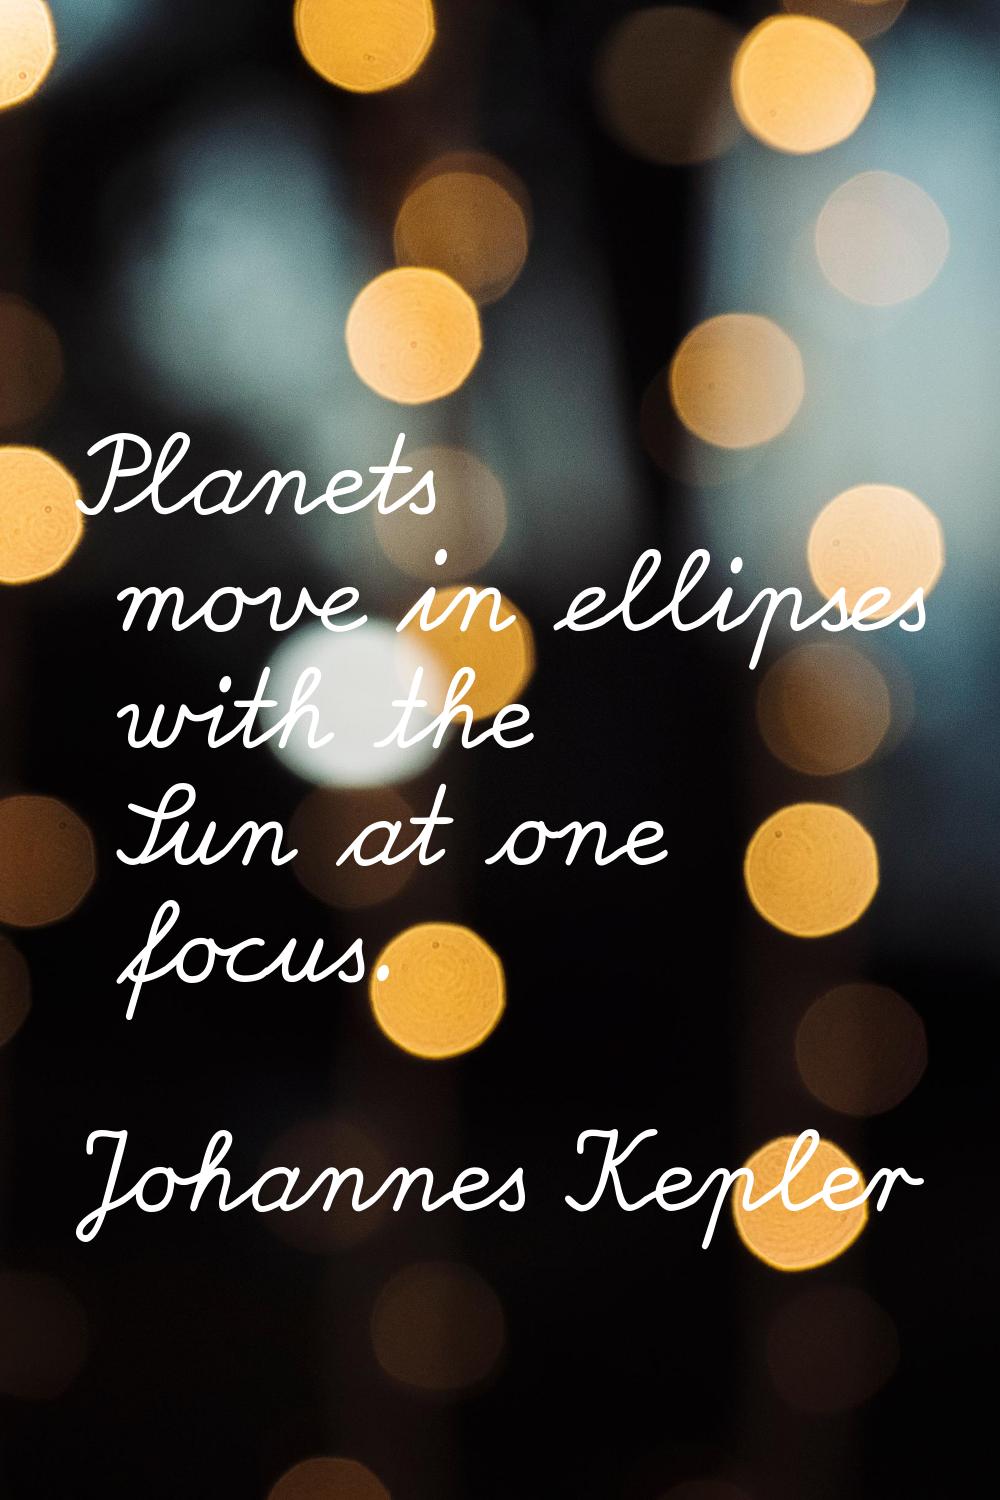 Planets move in ellipses with the Sun at one focus.